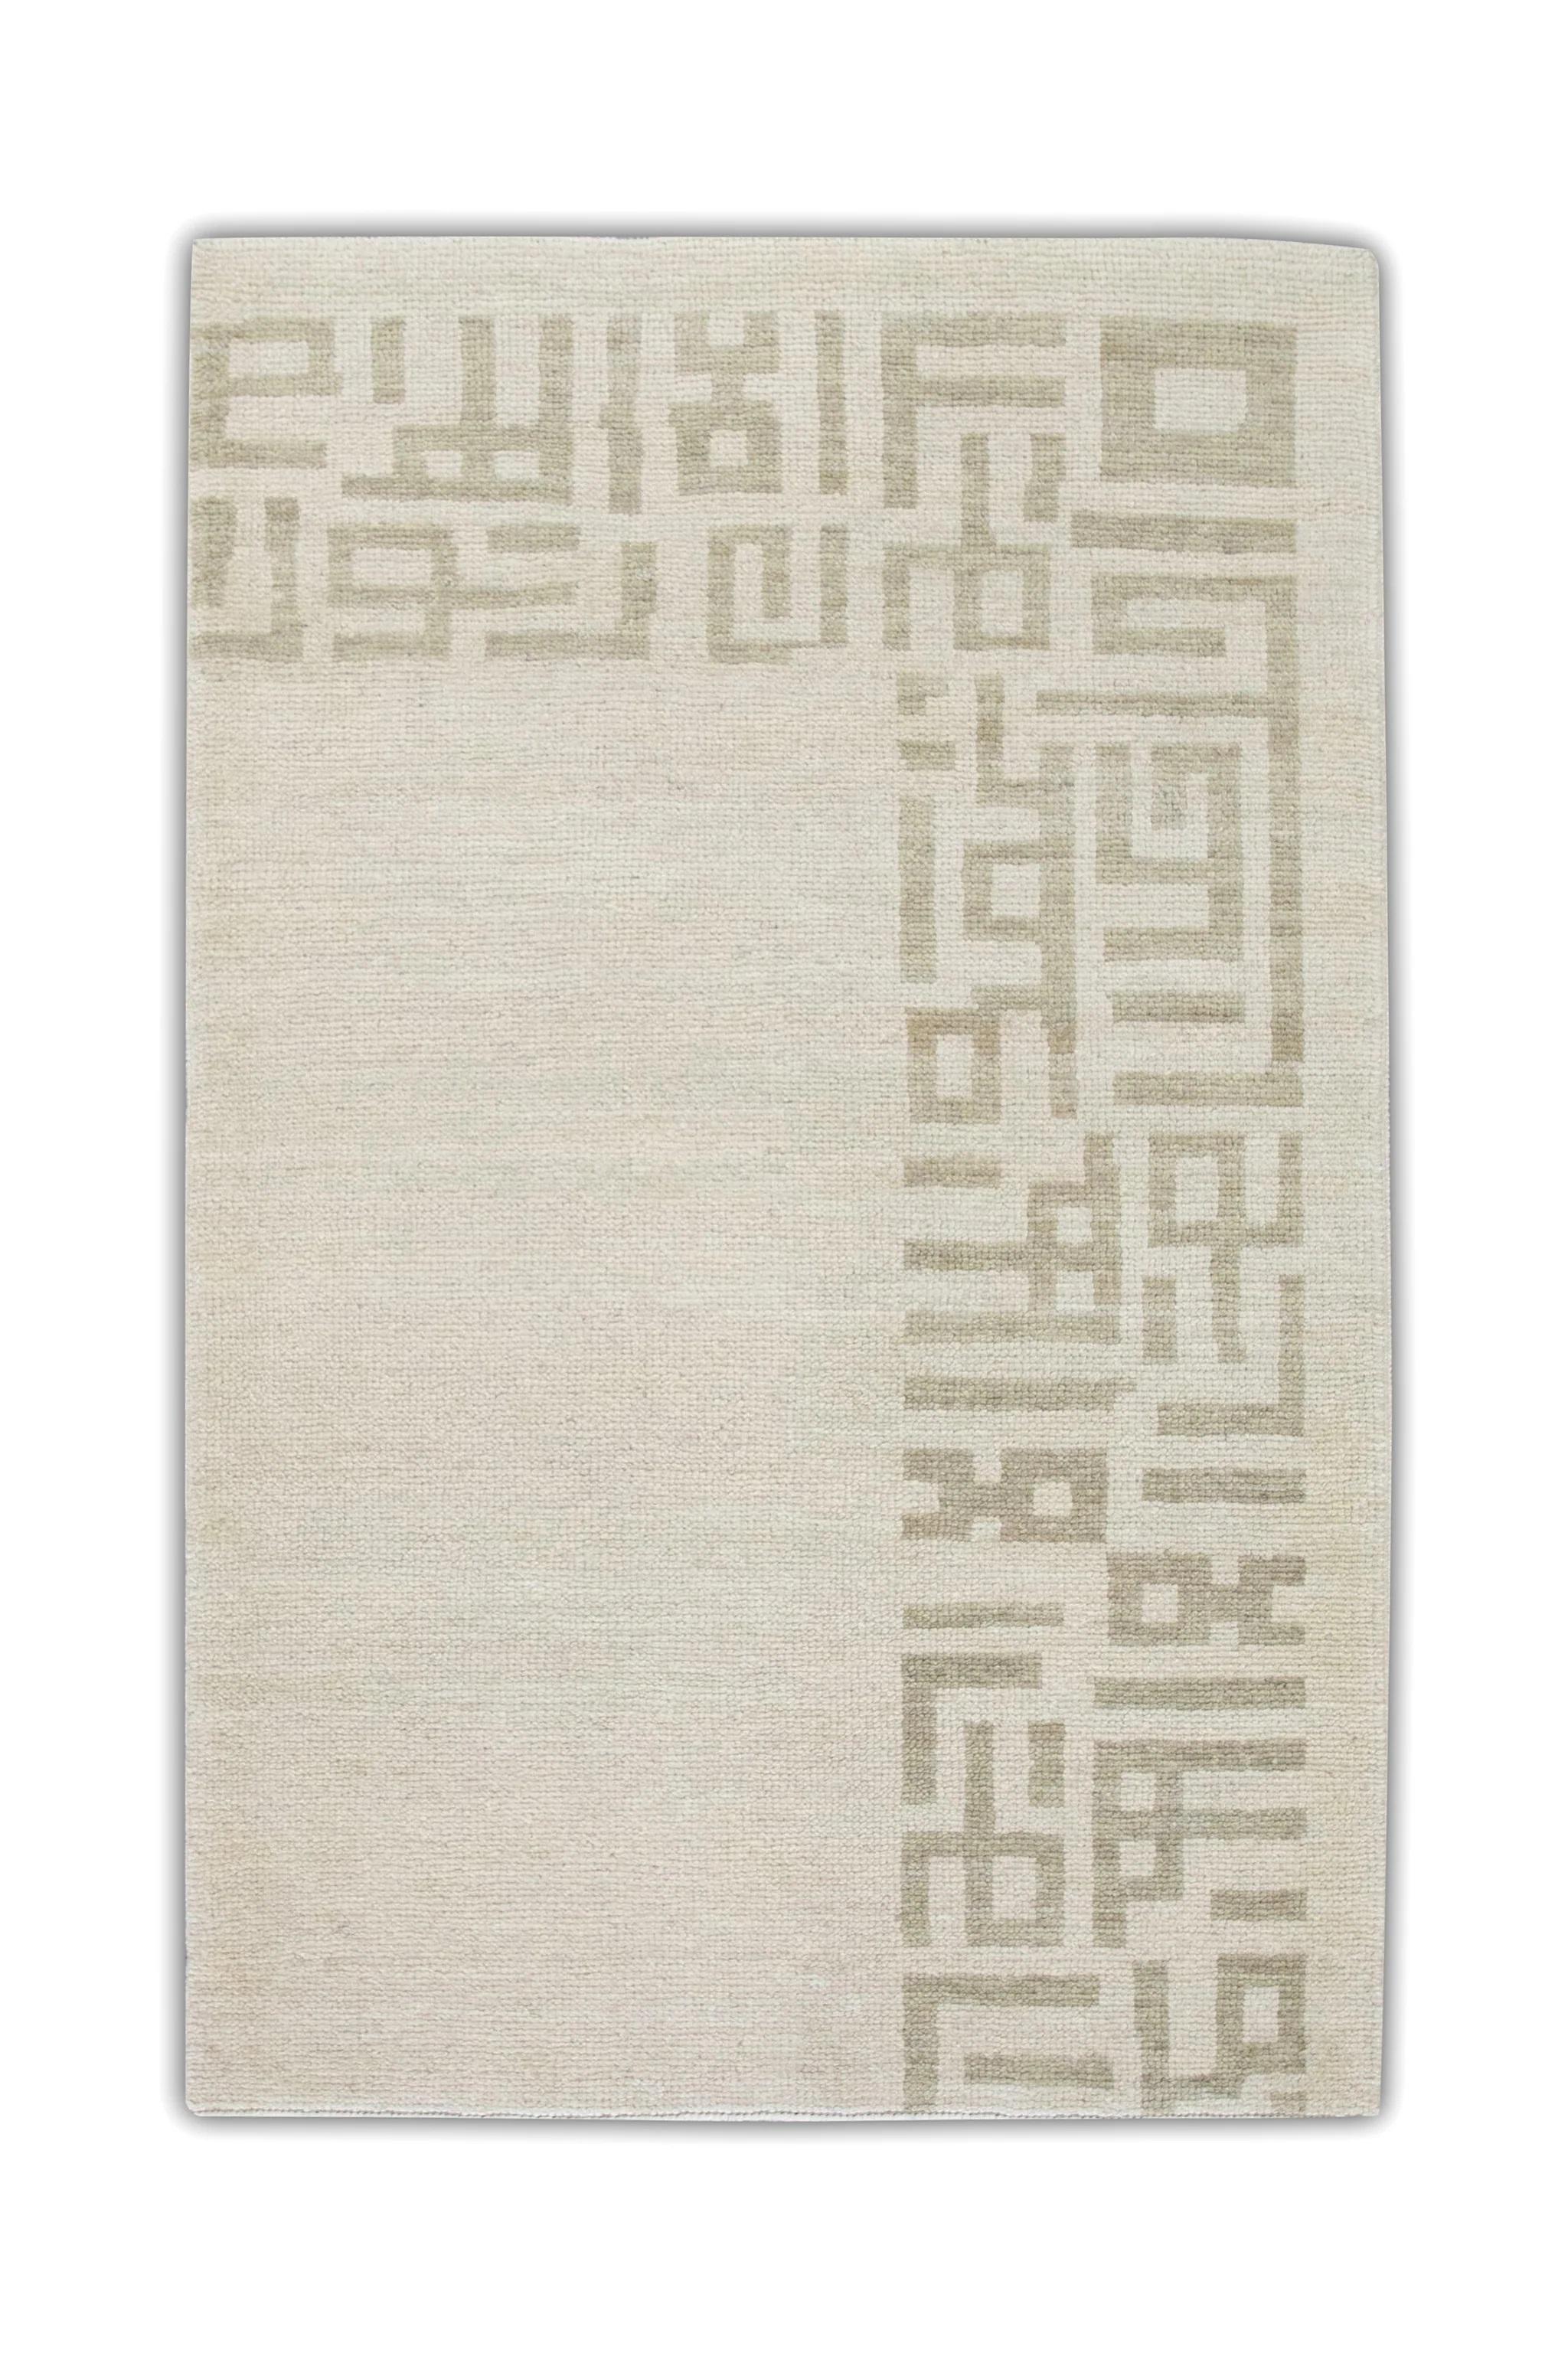 Wool Cream and Taupe Handwoven Turkish Oushak Rug in Geometric Tribal Pattern 3'3x5'2 For Sale